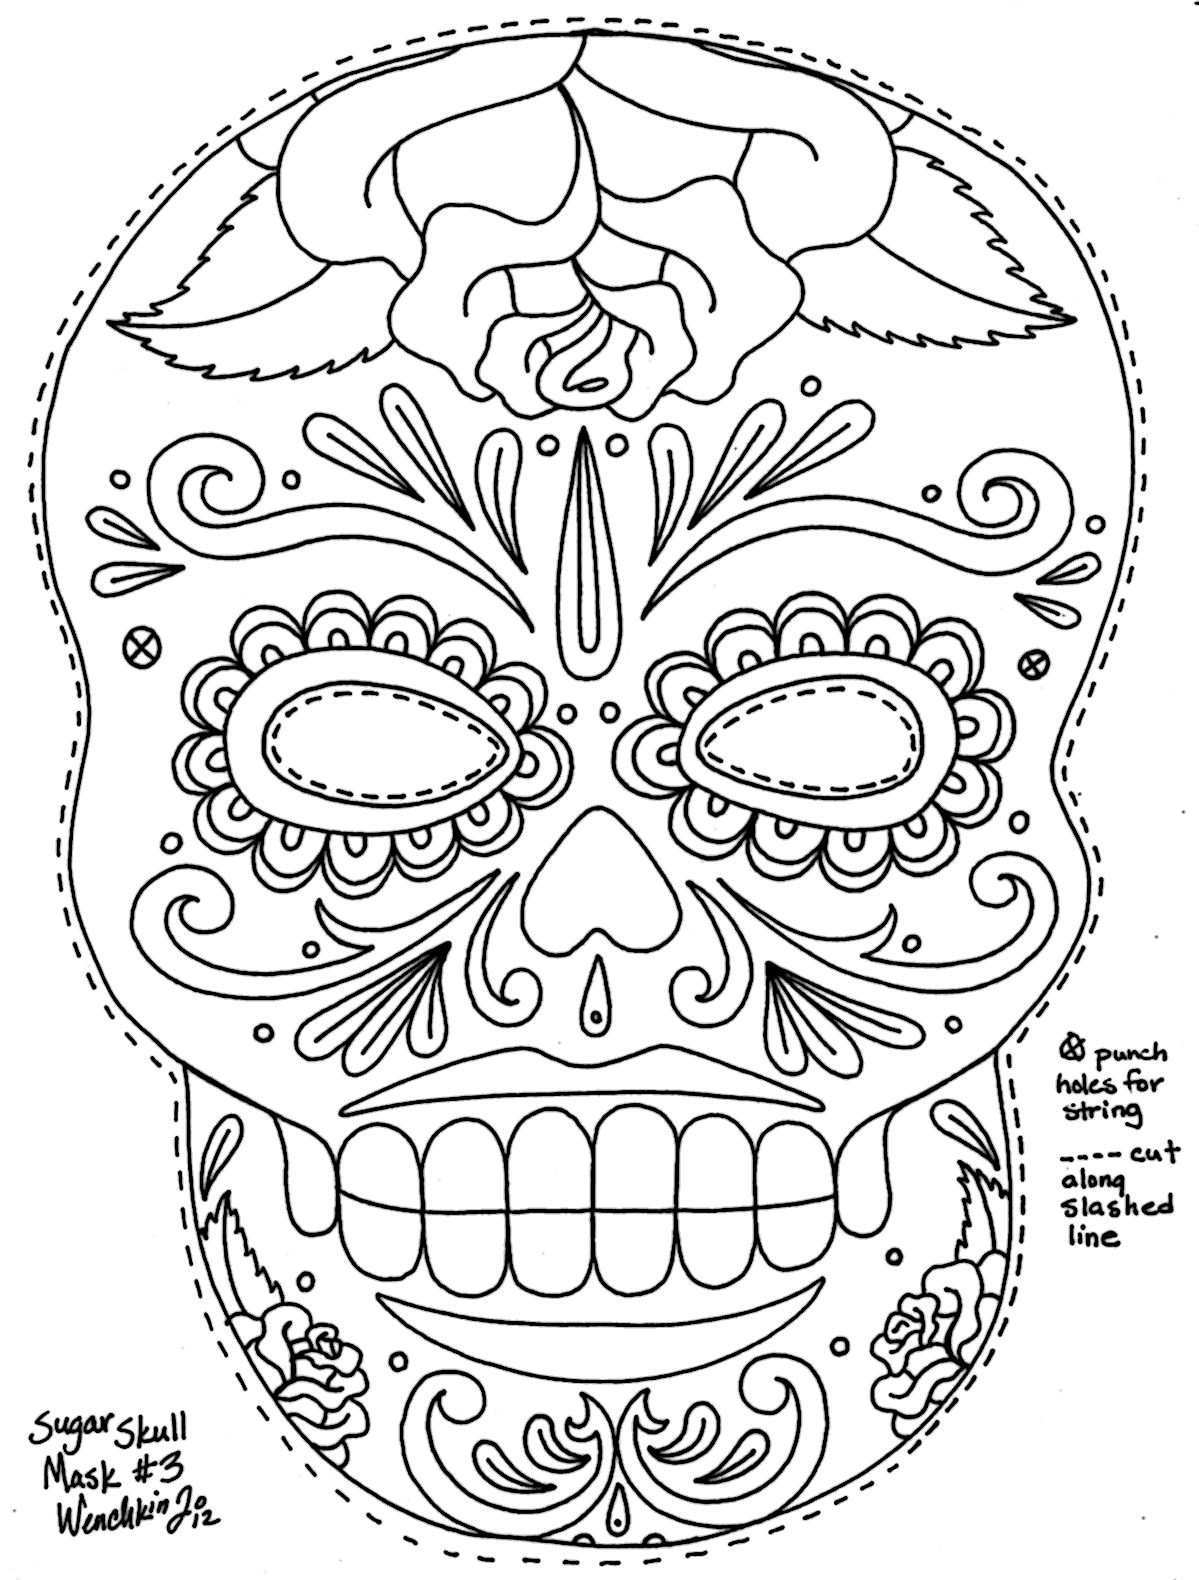 Sugar Skull Skull Coloring Pages Day Of The Dead Mask Coloring Pages